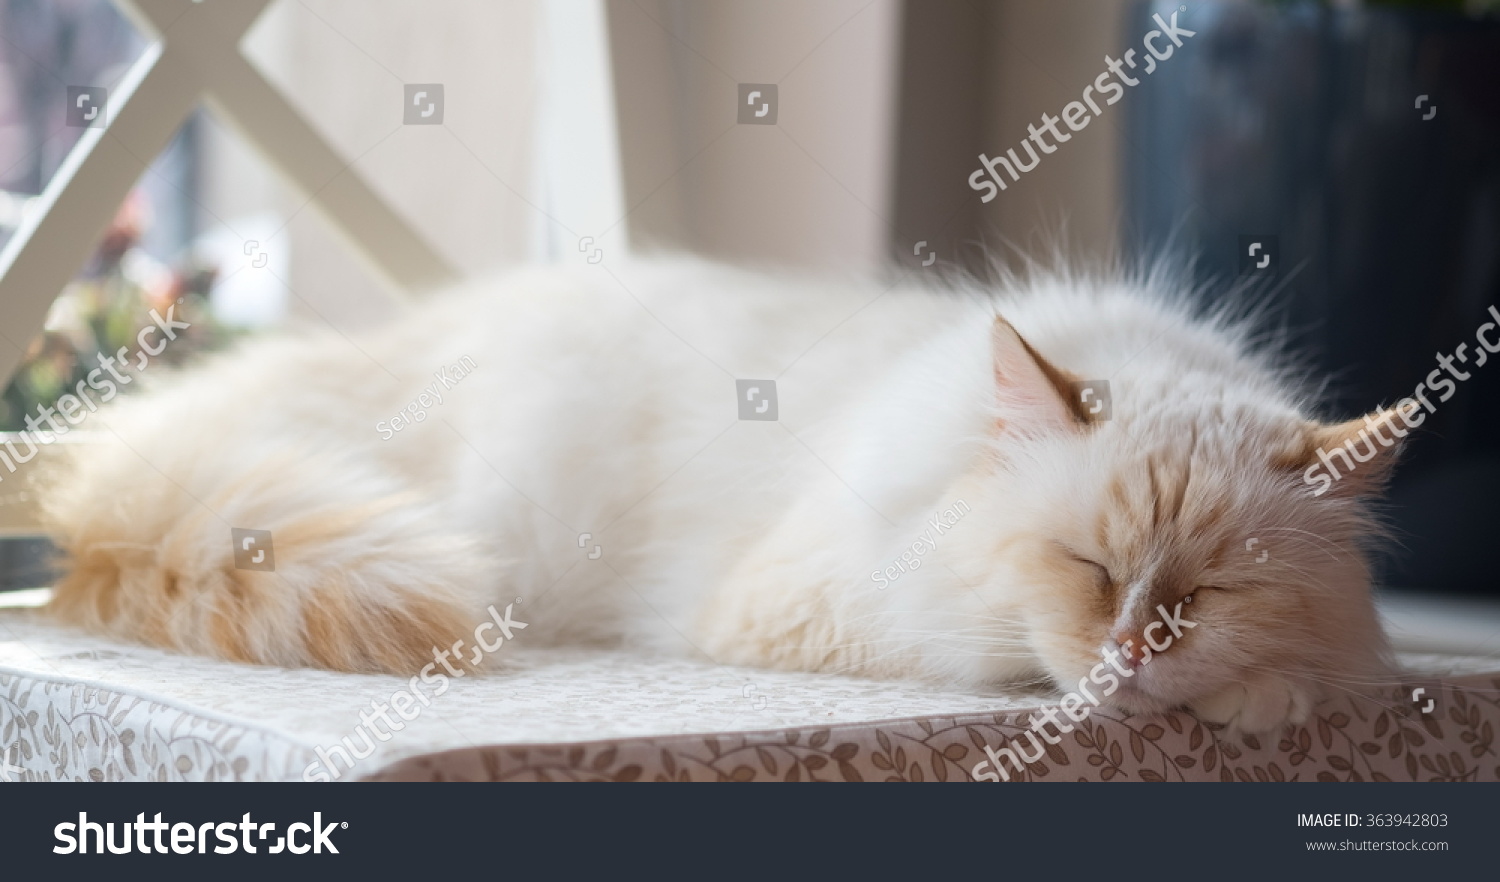 red point siberian cat